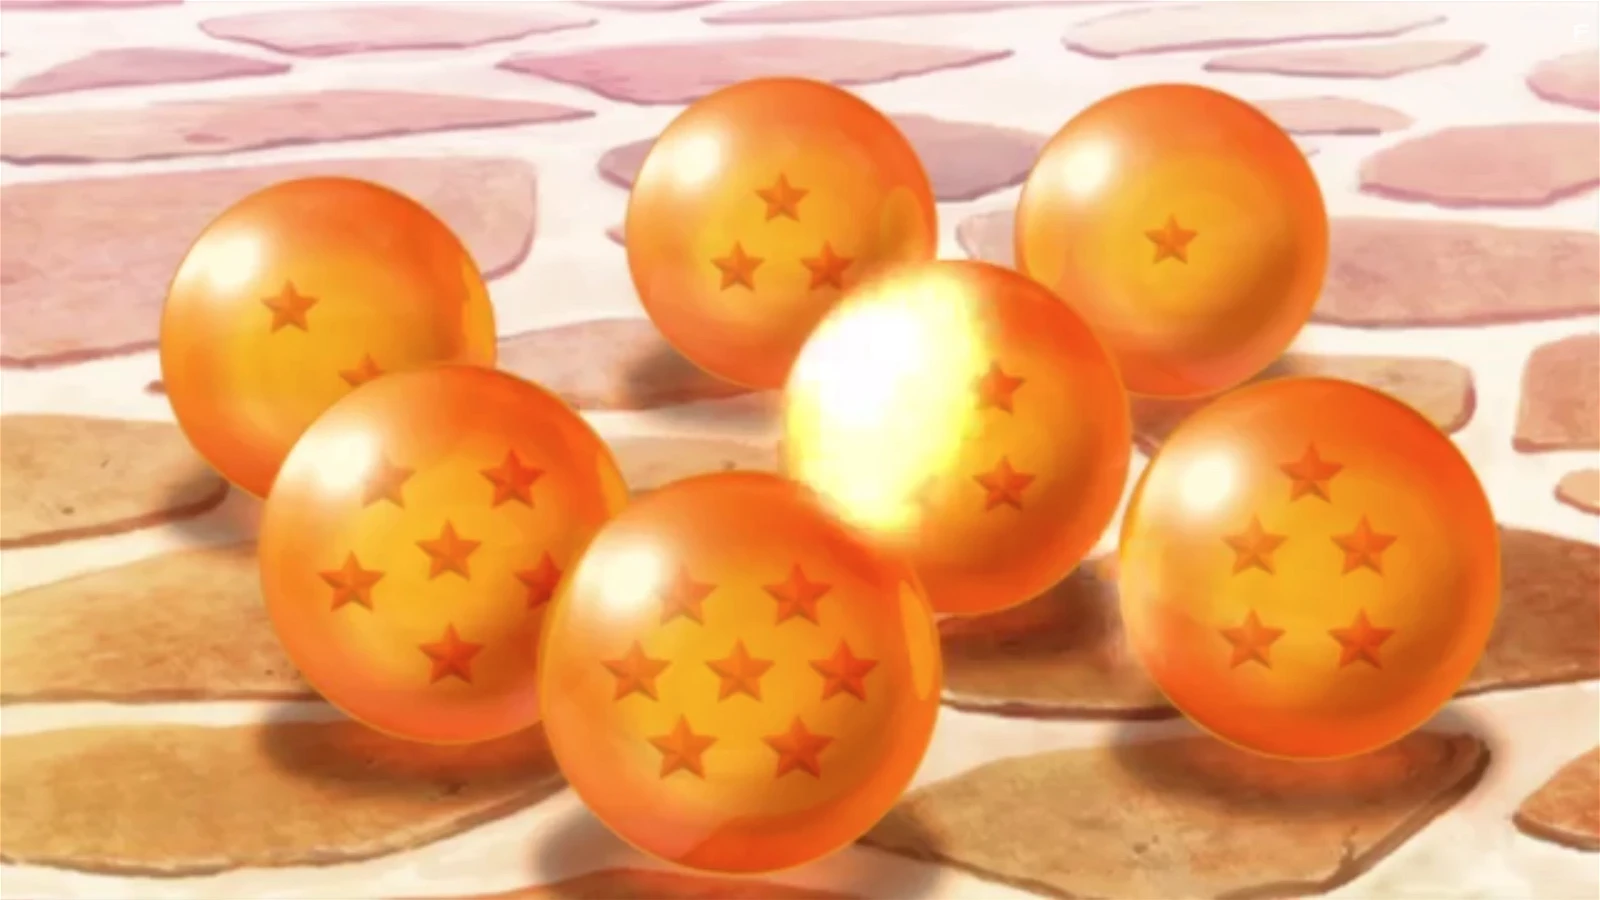 The Dragons Balls from Dragon Ball Z